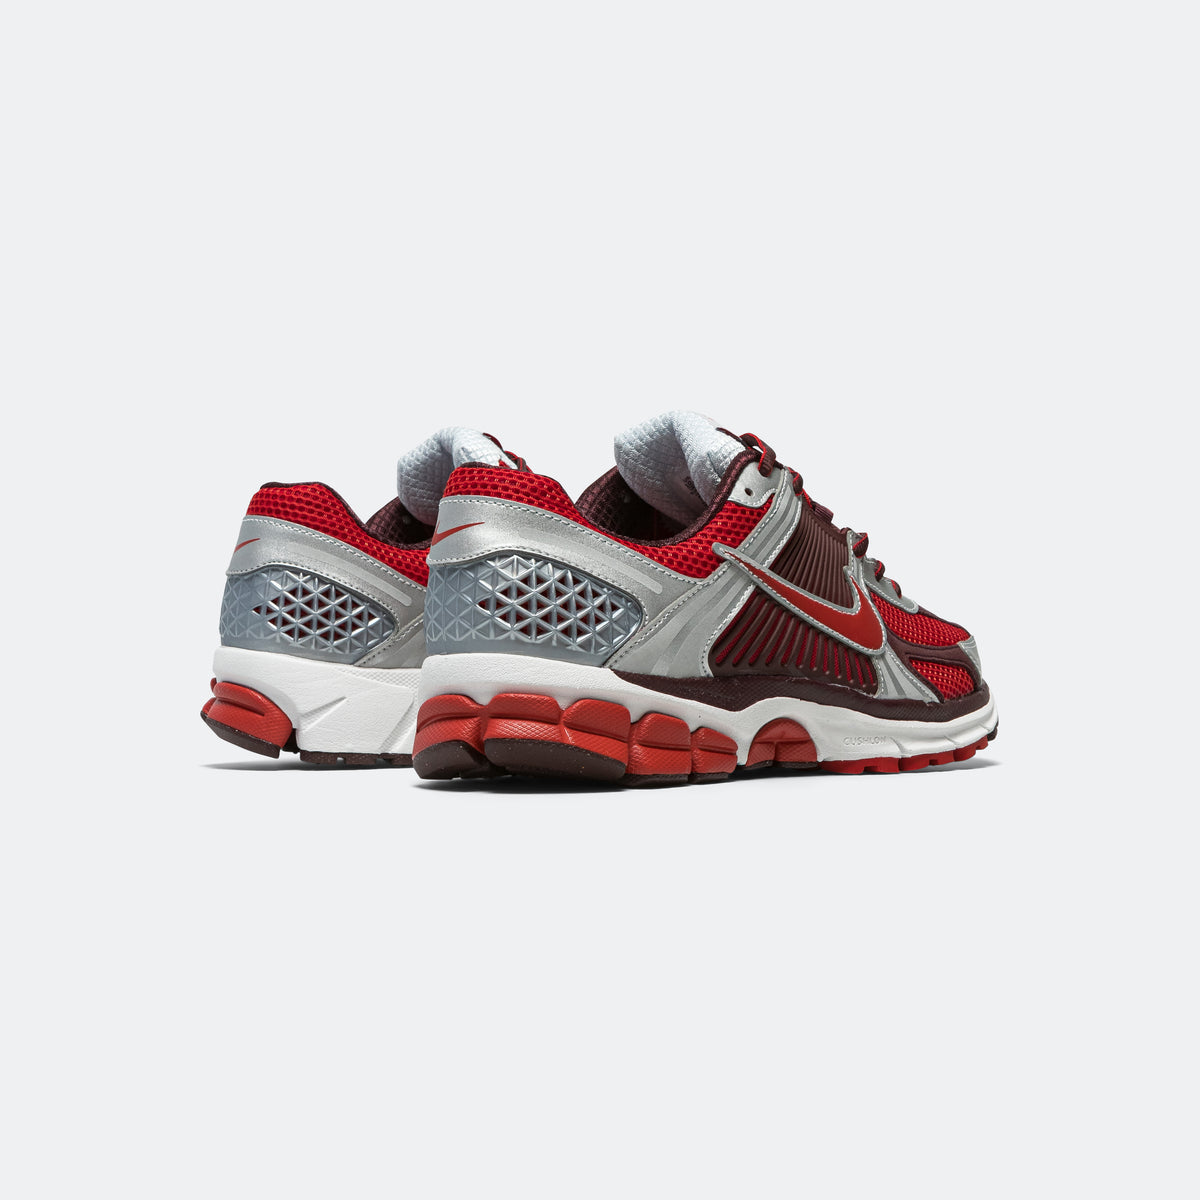 WMNS Nike Vomero 5 'Mystic Red'  Available Now — CNK Daily